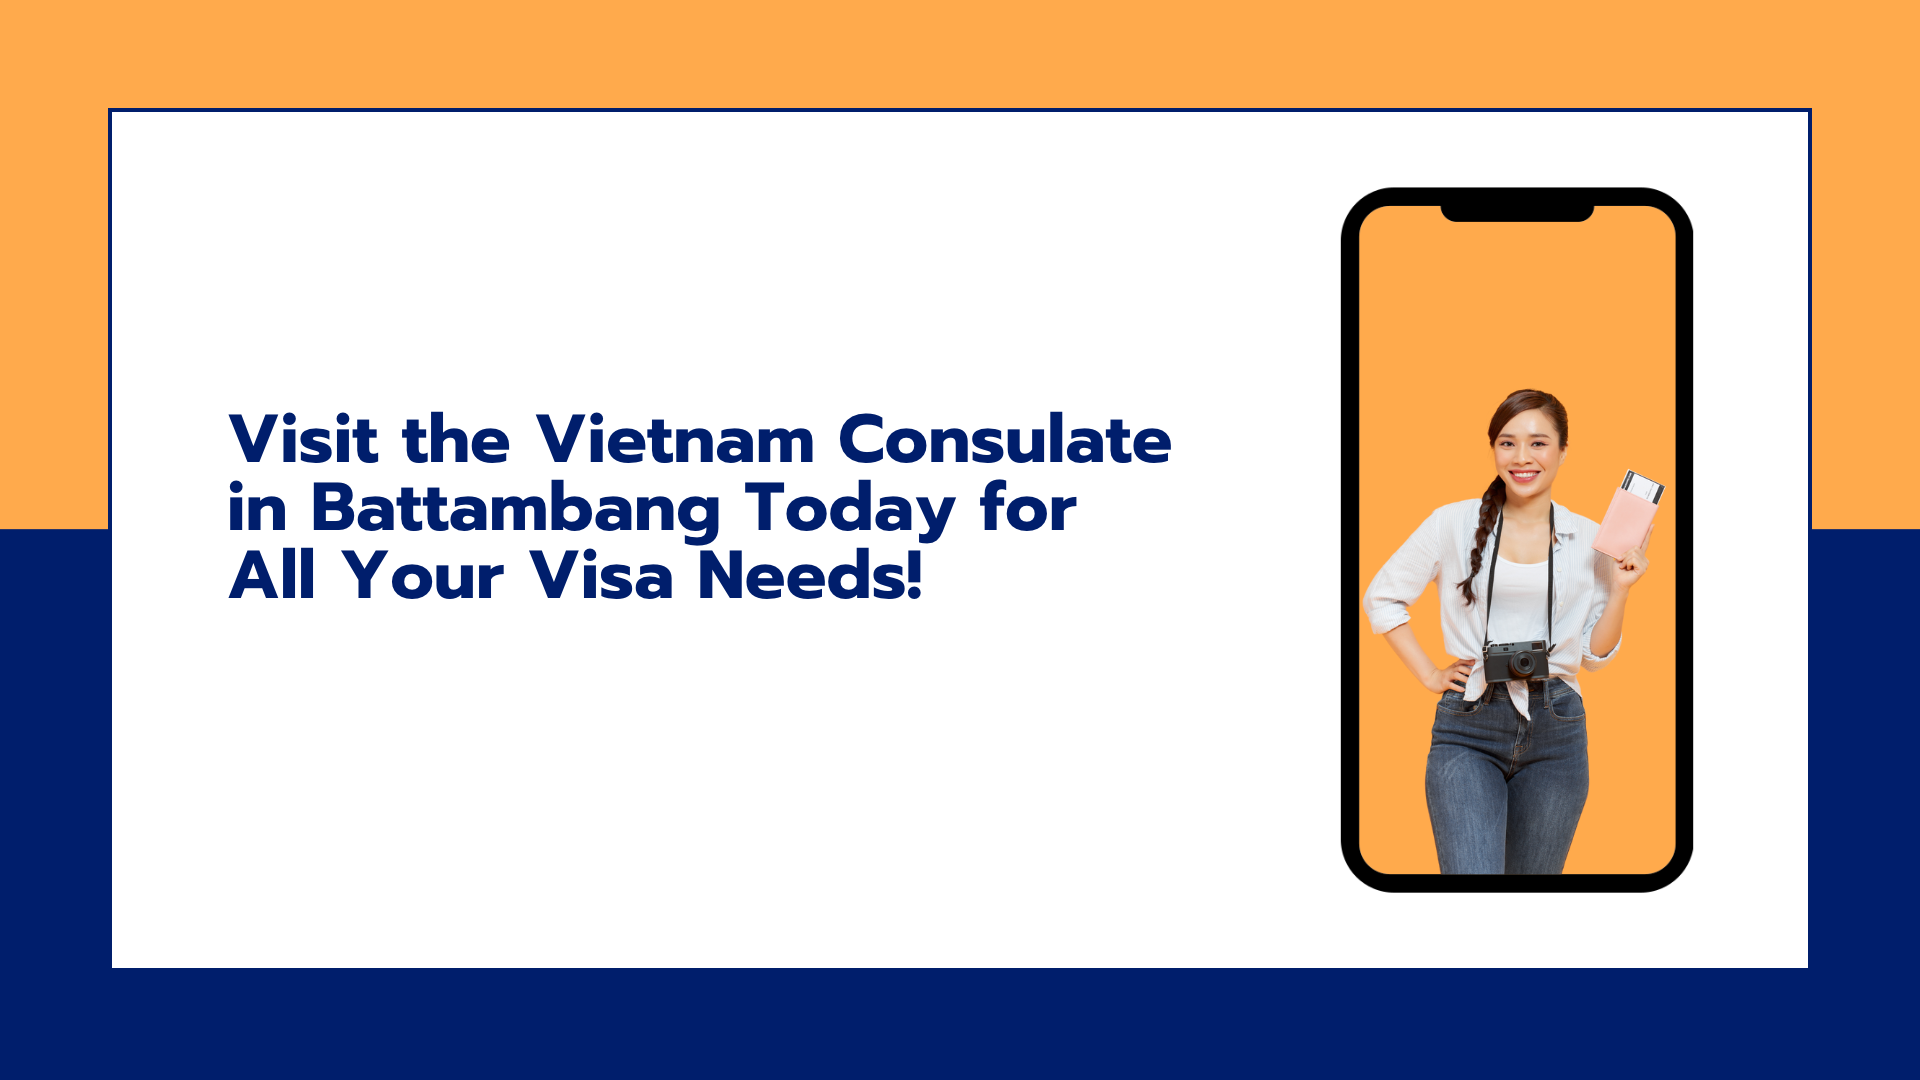 Visit the Vietnam Consulate in Battambang Today for All Your Visa Needs!